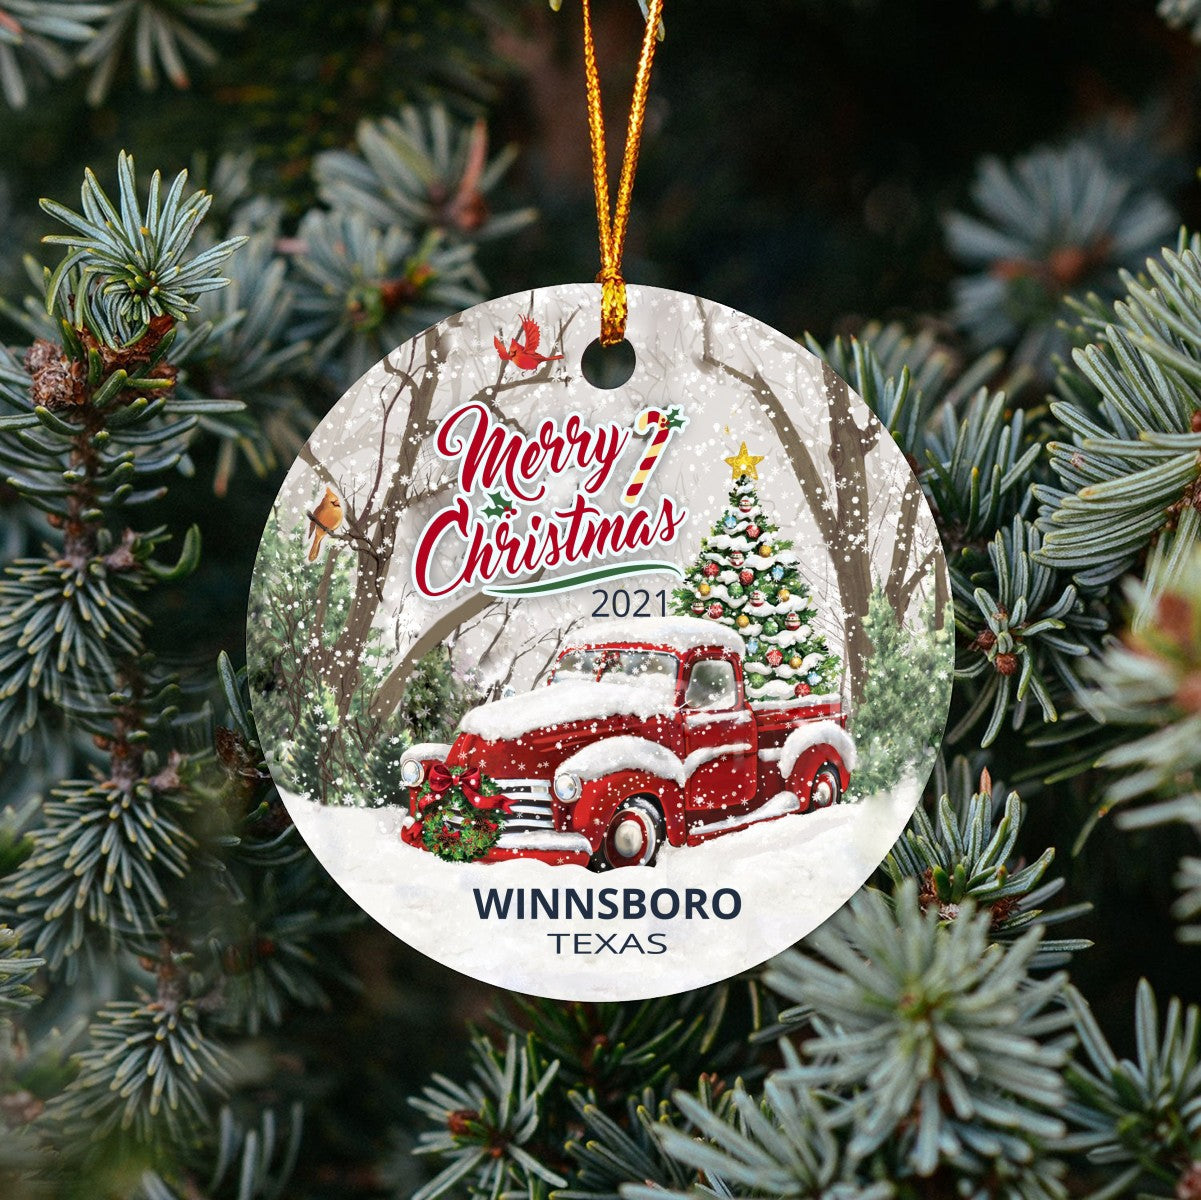 Christmas Tree Ornaments Winnsboro - Ornament Customize With Name City And State Winnsboro Texas TX - Red Truck Xmas Ornaments 3'' Plastic Gift For Family, Friend And Housewarming